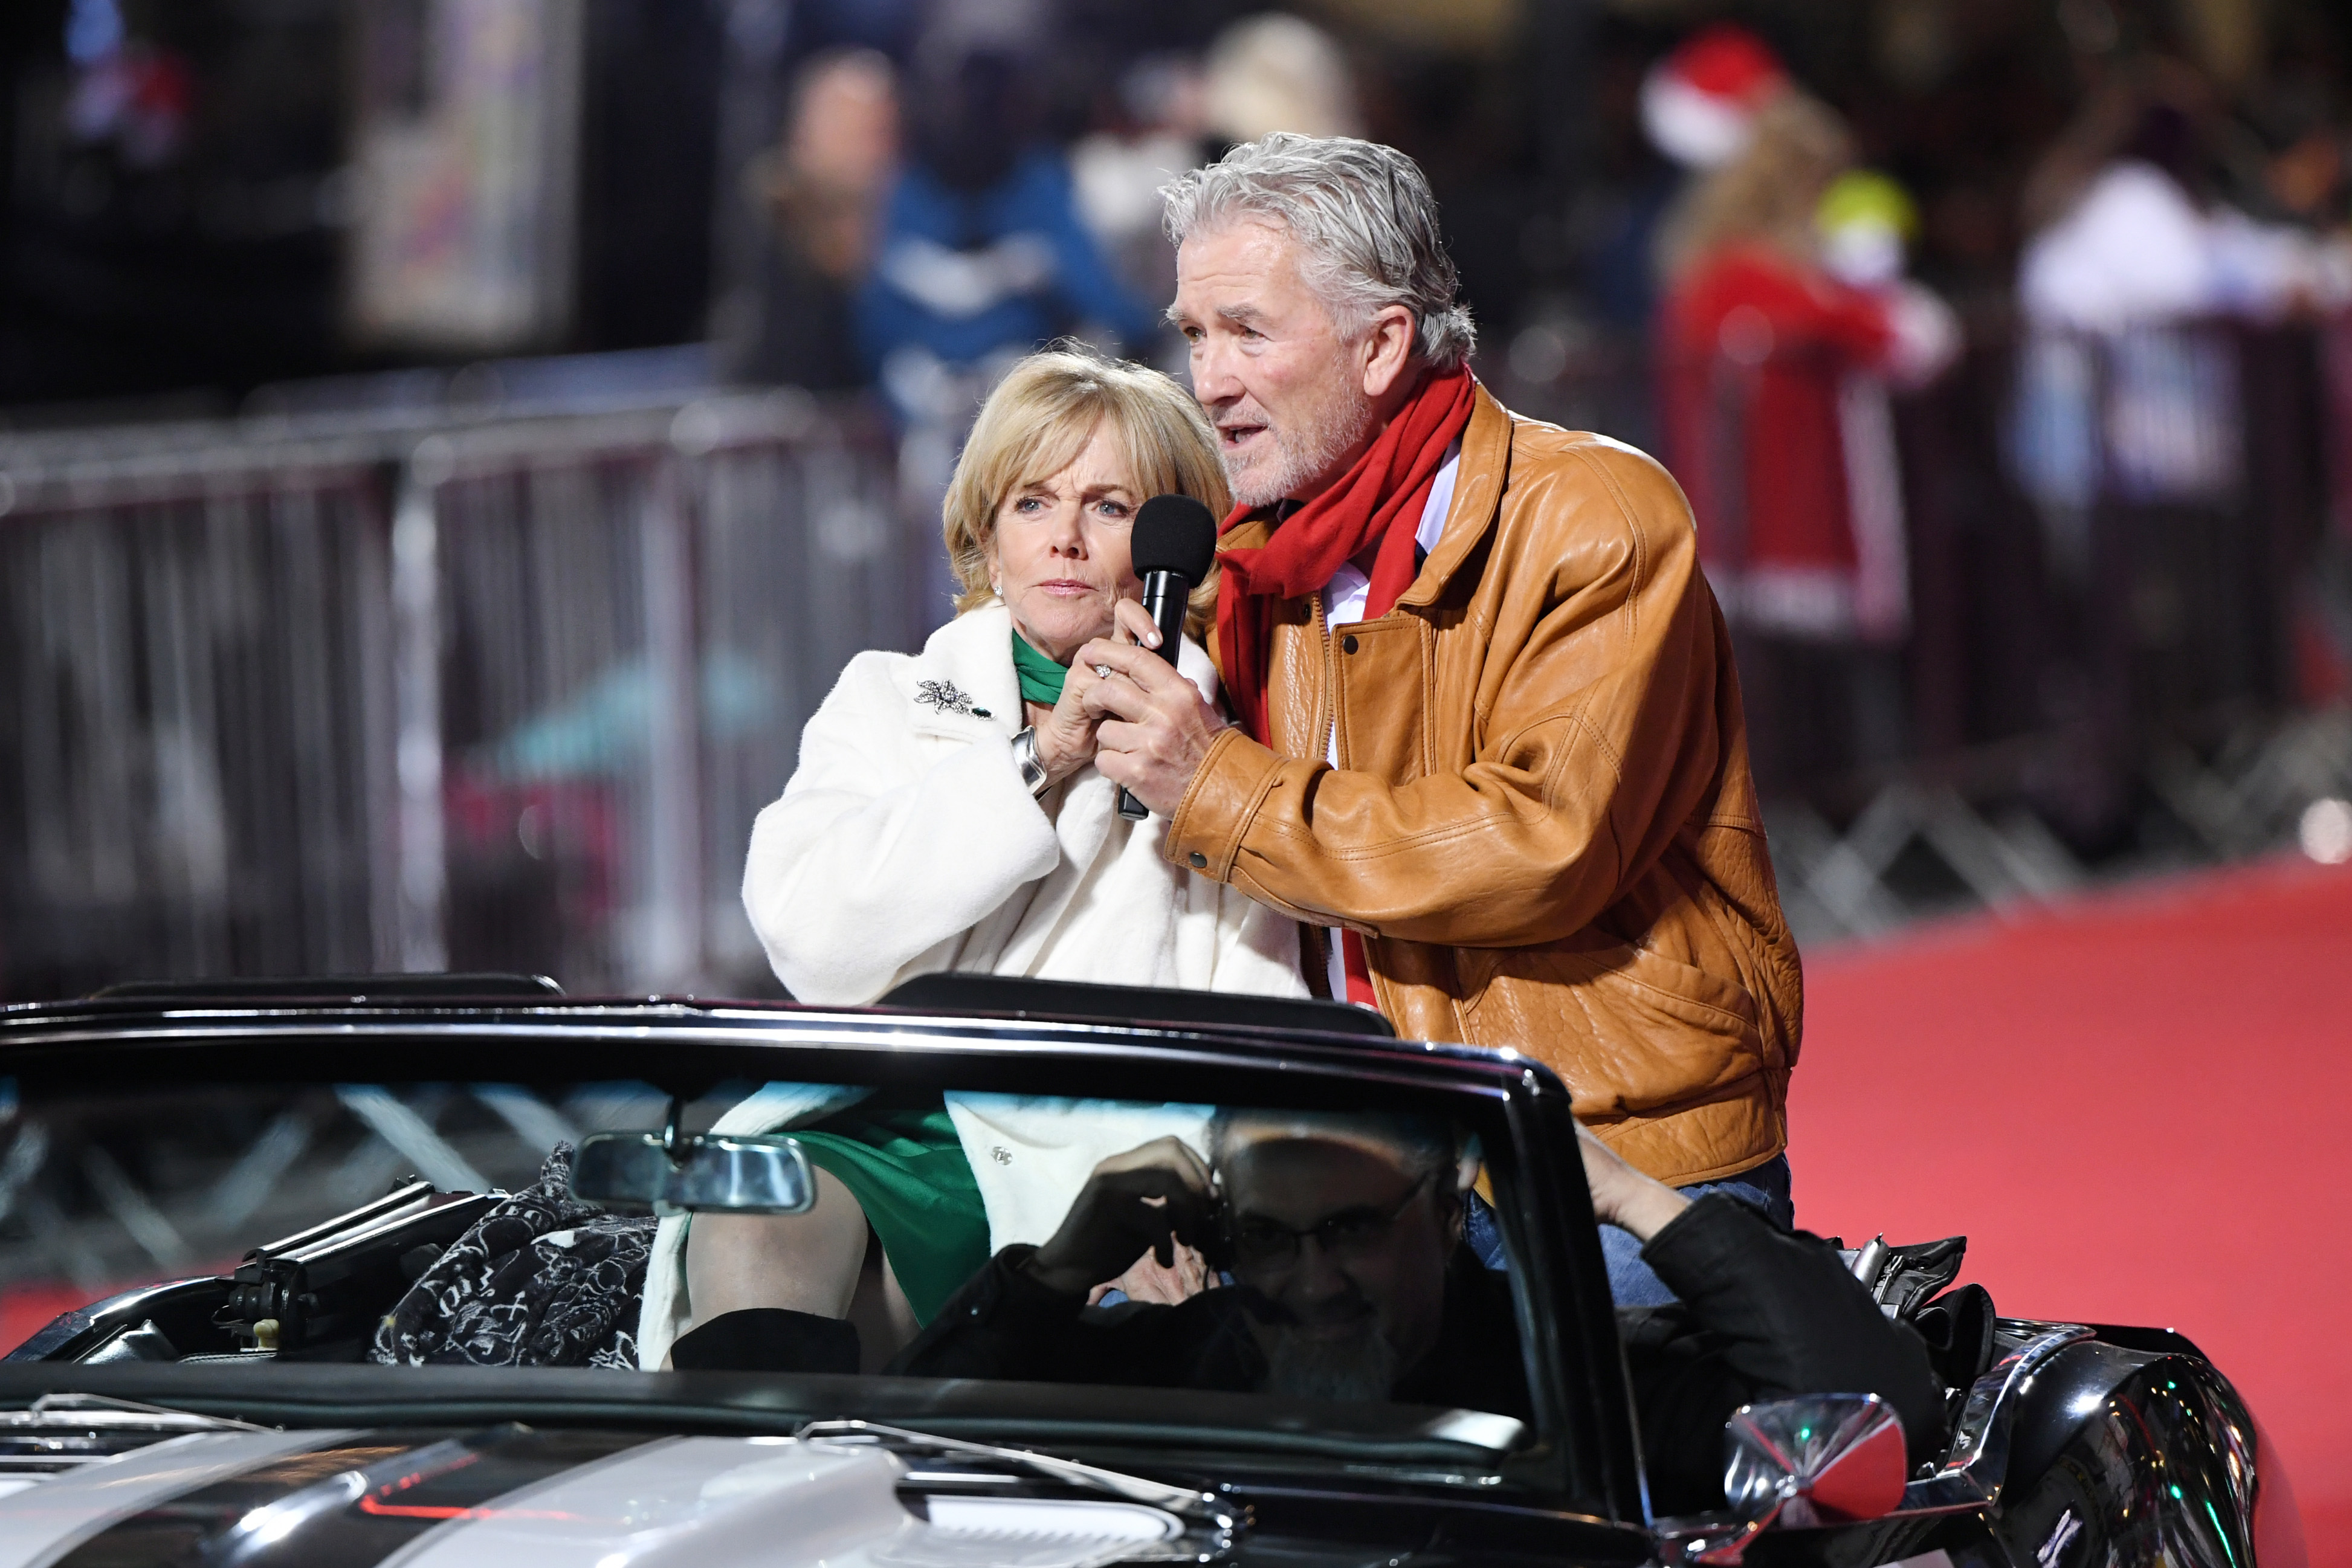 Linda Purl and Patrick Duffy at the 90th Anniversary of the Hollywood Christmas Parade Supporting Marine Toys For Tots in Hollywood, 2022 | Source: Getty Images